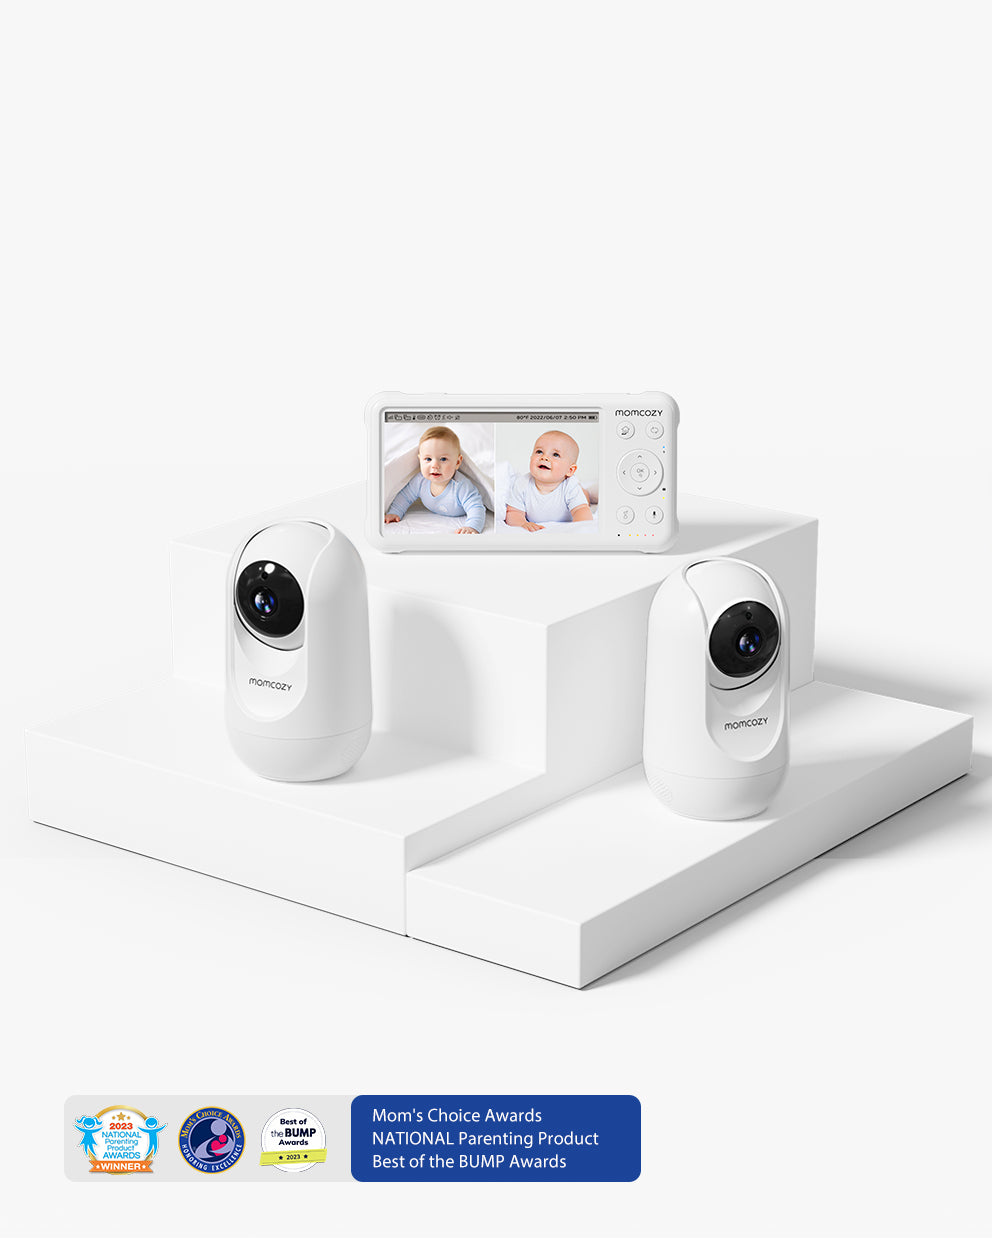 Babysense Smart Nursery - Best Baby Monitor With App Featuring Infant Sound  & Night Light Machine With White Noise, Baby Movement Monitor & HD WiFi